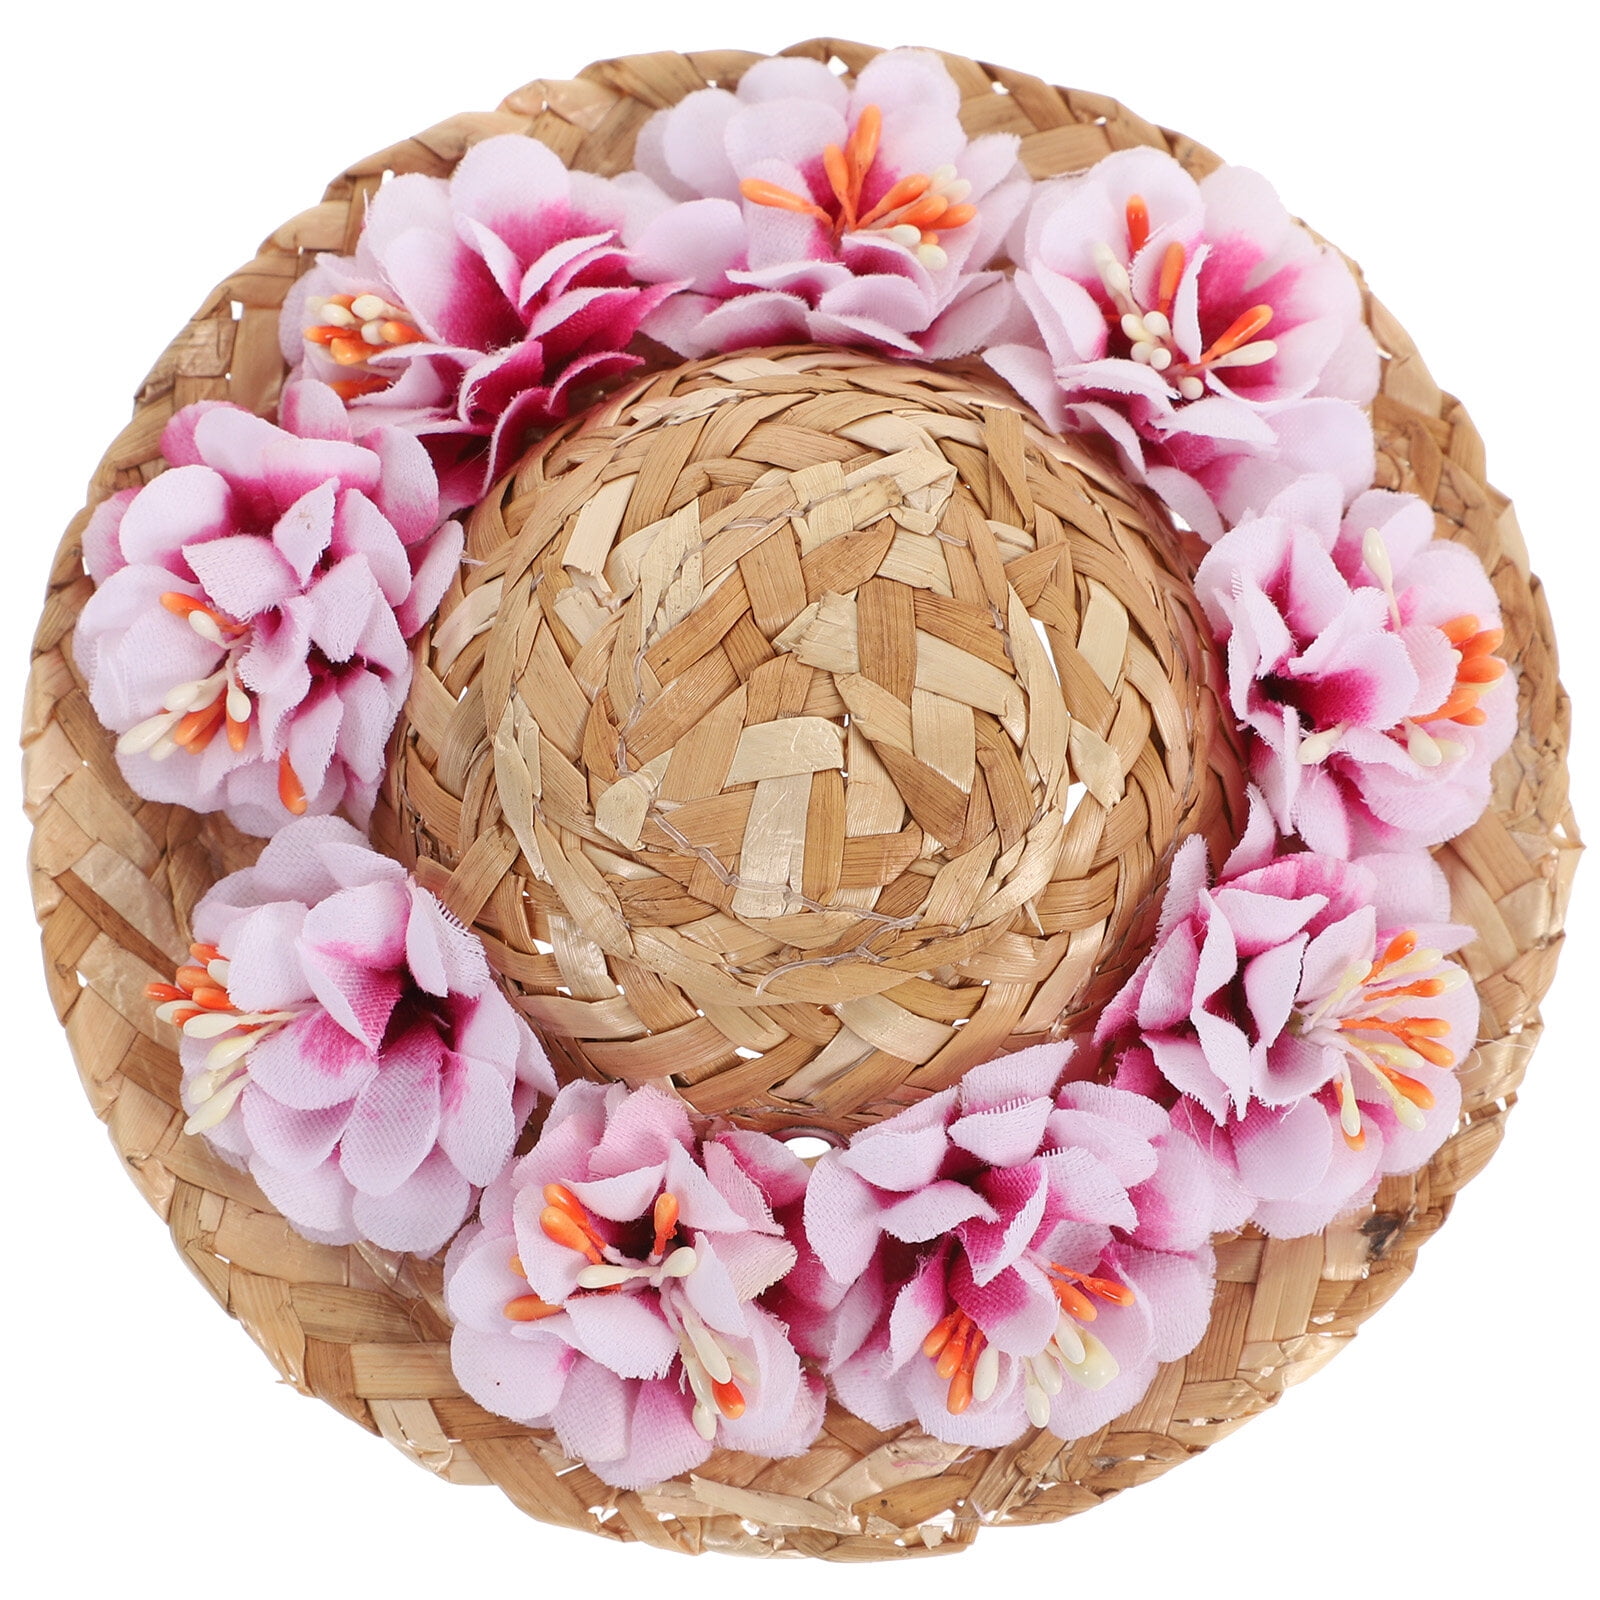 FRCOLOR Pet Flower Straw Hat Dog Spring Summer Sunhat Woven Straw Hat ...